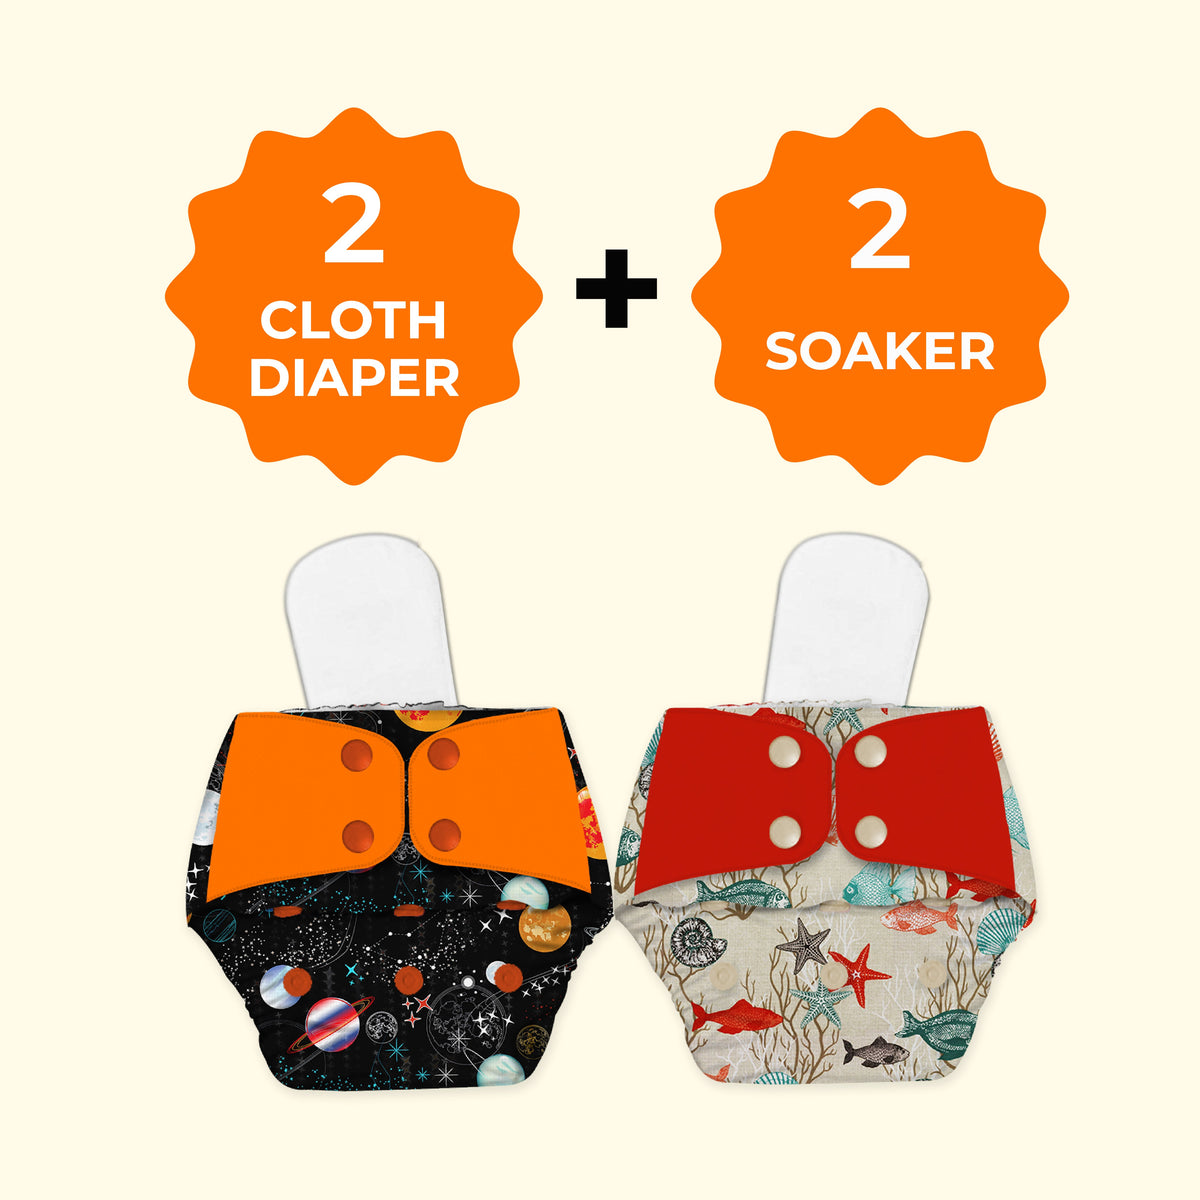 Regular Diaper by Snugkins - Freesize Reusable, Waterproof & Washable Cloth Diapers for day time use. Contains 2 Pocket Diaper & 2 Wet-Free Microfiber Terry Soaker (Fits babies 5-17kgs)